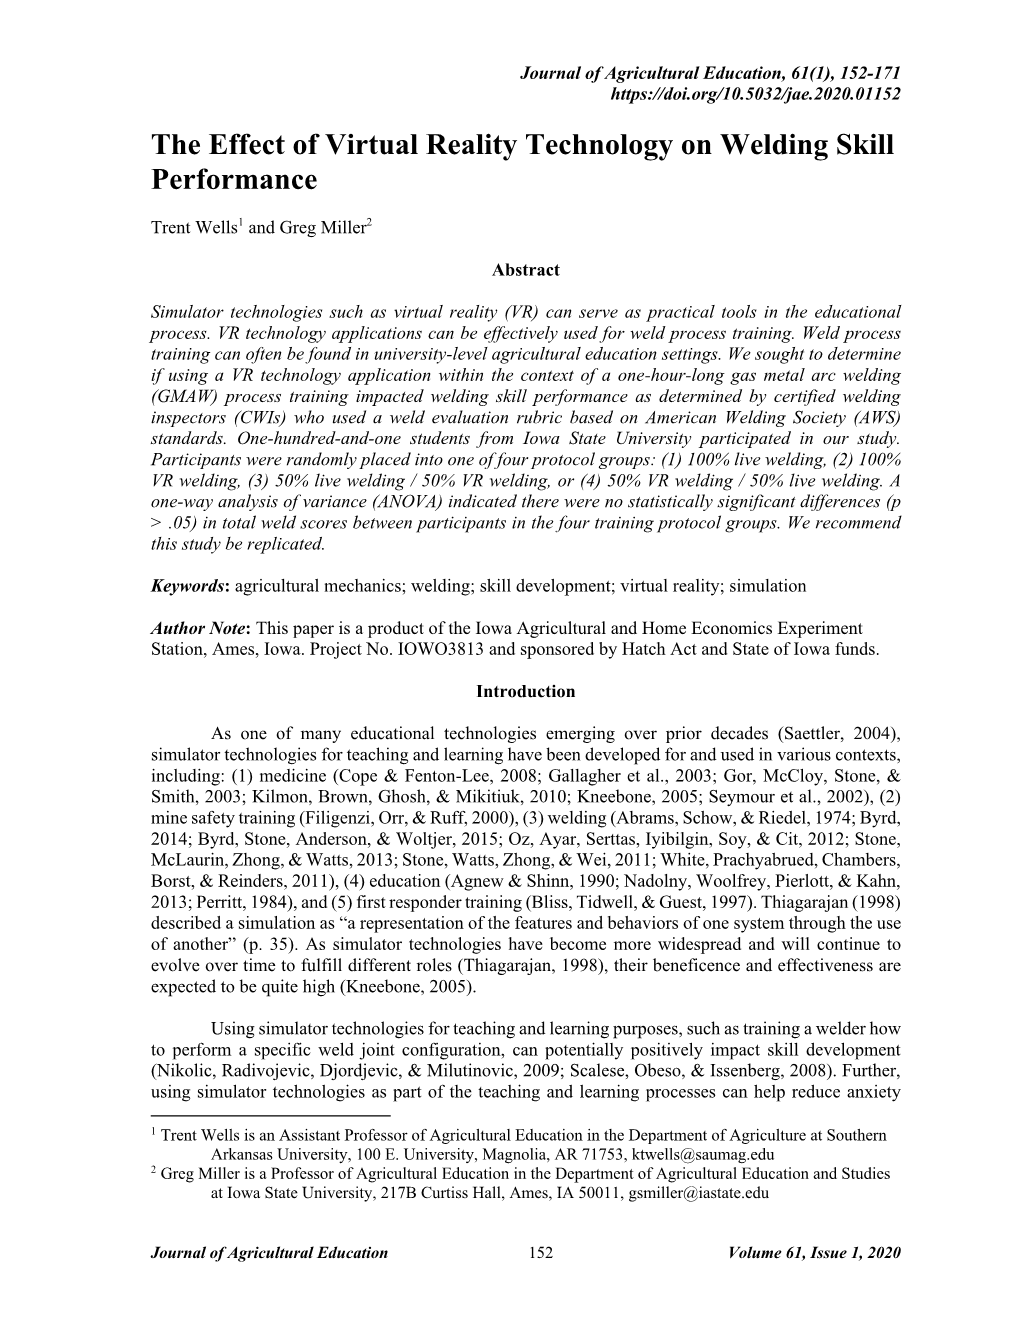 The Effect of Virtual Reality Technology on Welding Skill Performance